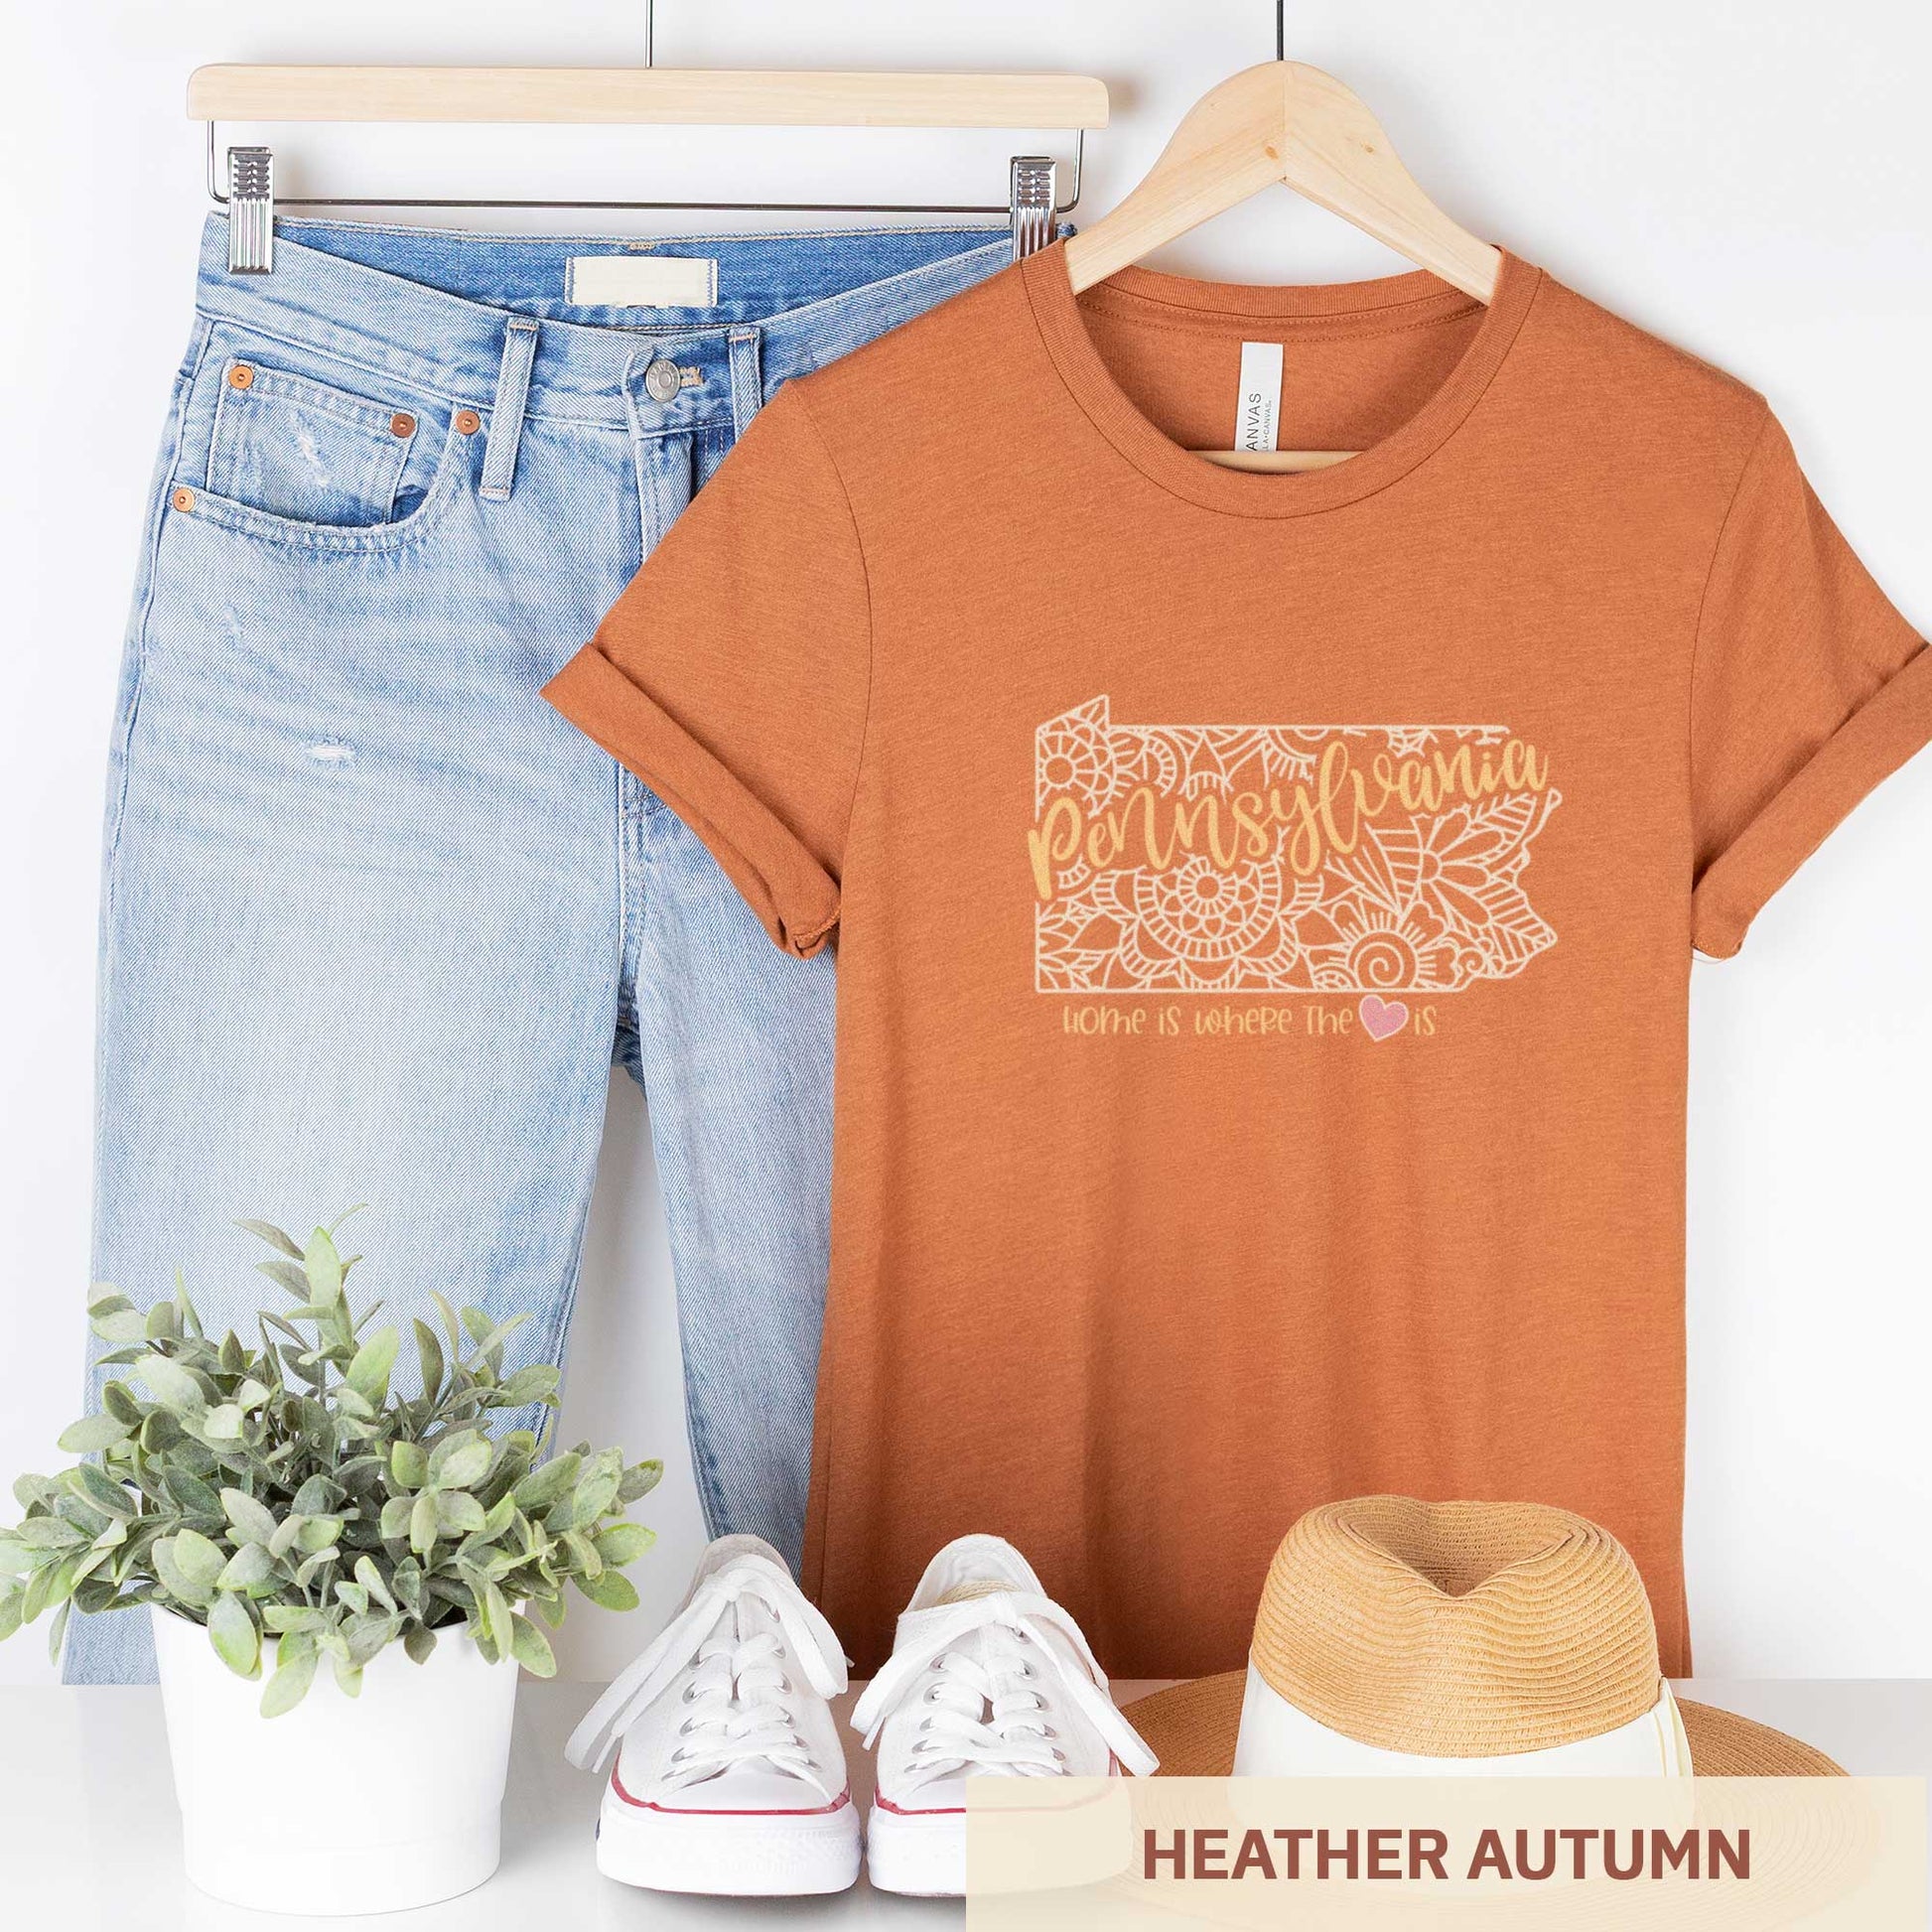 A hanging heather autumn Bella Canvas t-shirt featuring a mandala in the shape of Pennsylvania with the words home is where the heart is.